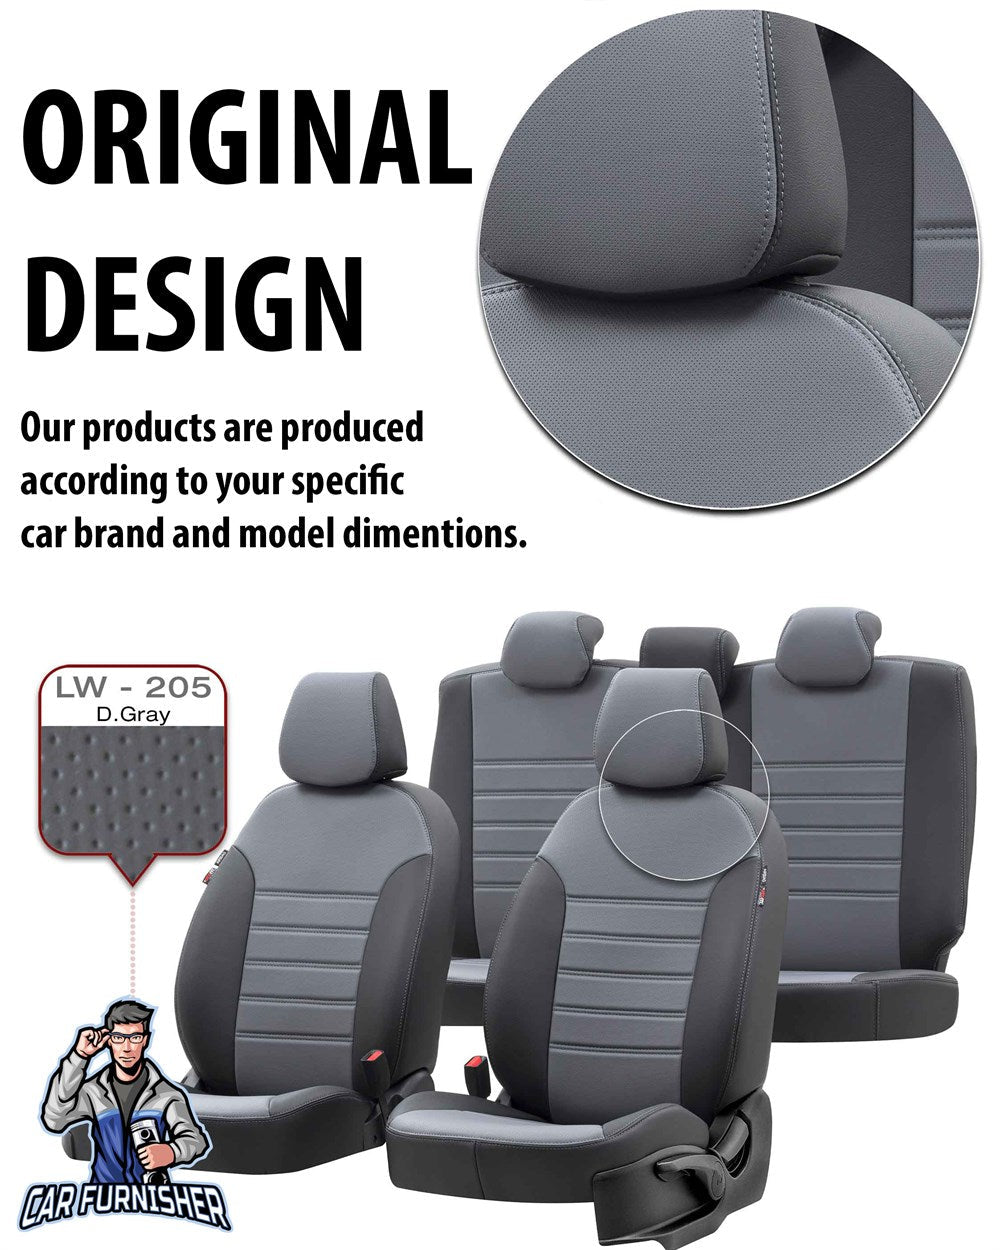 Hyundai Getz Seat Covers Istanbul Leather Design Smoked Black Leather